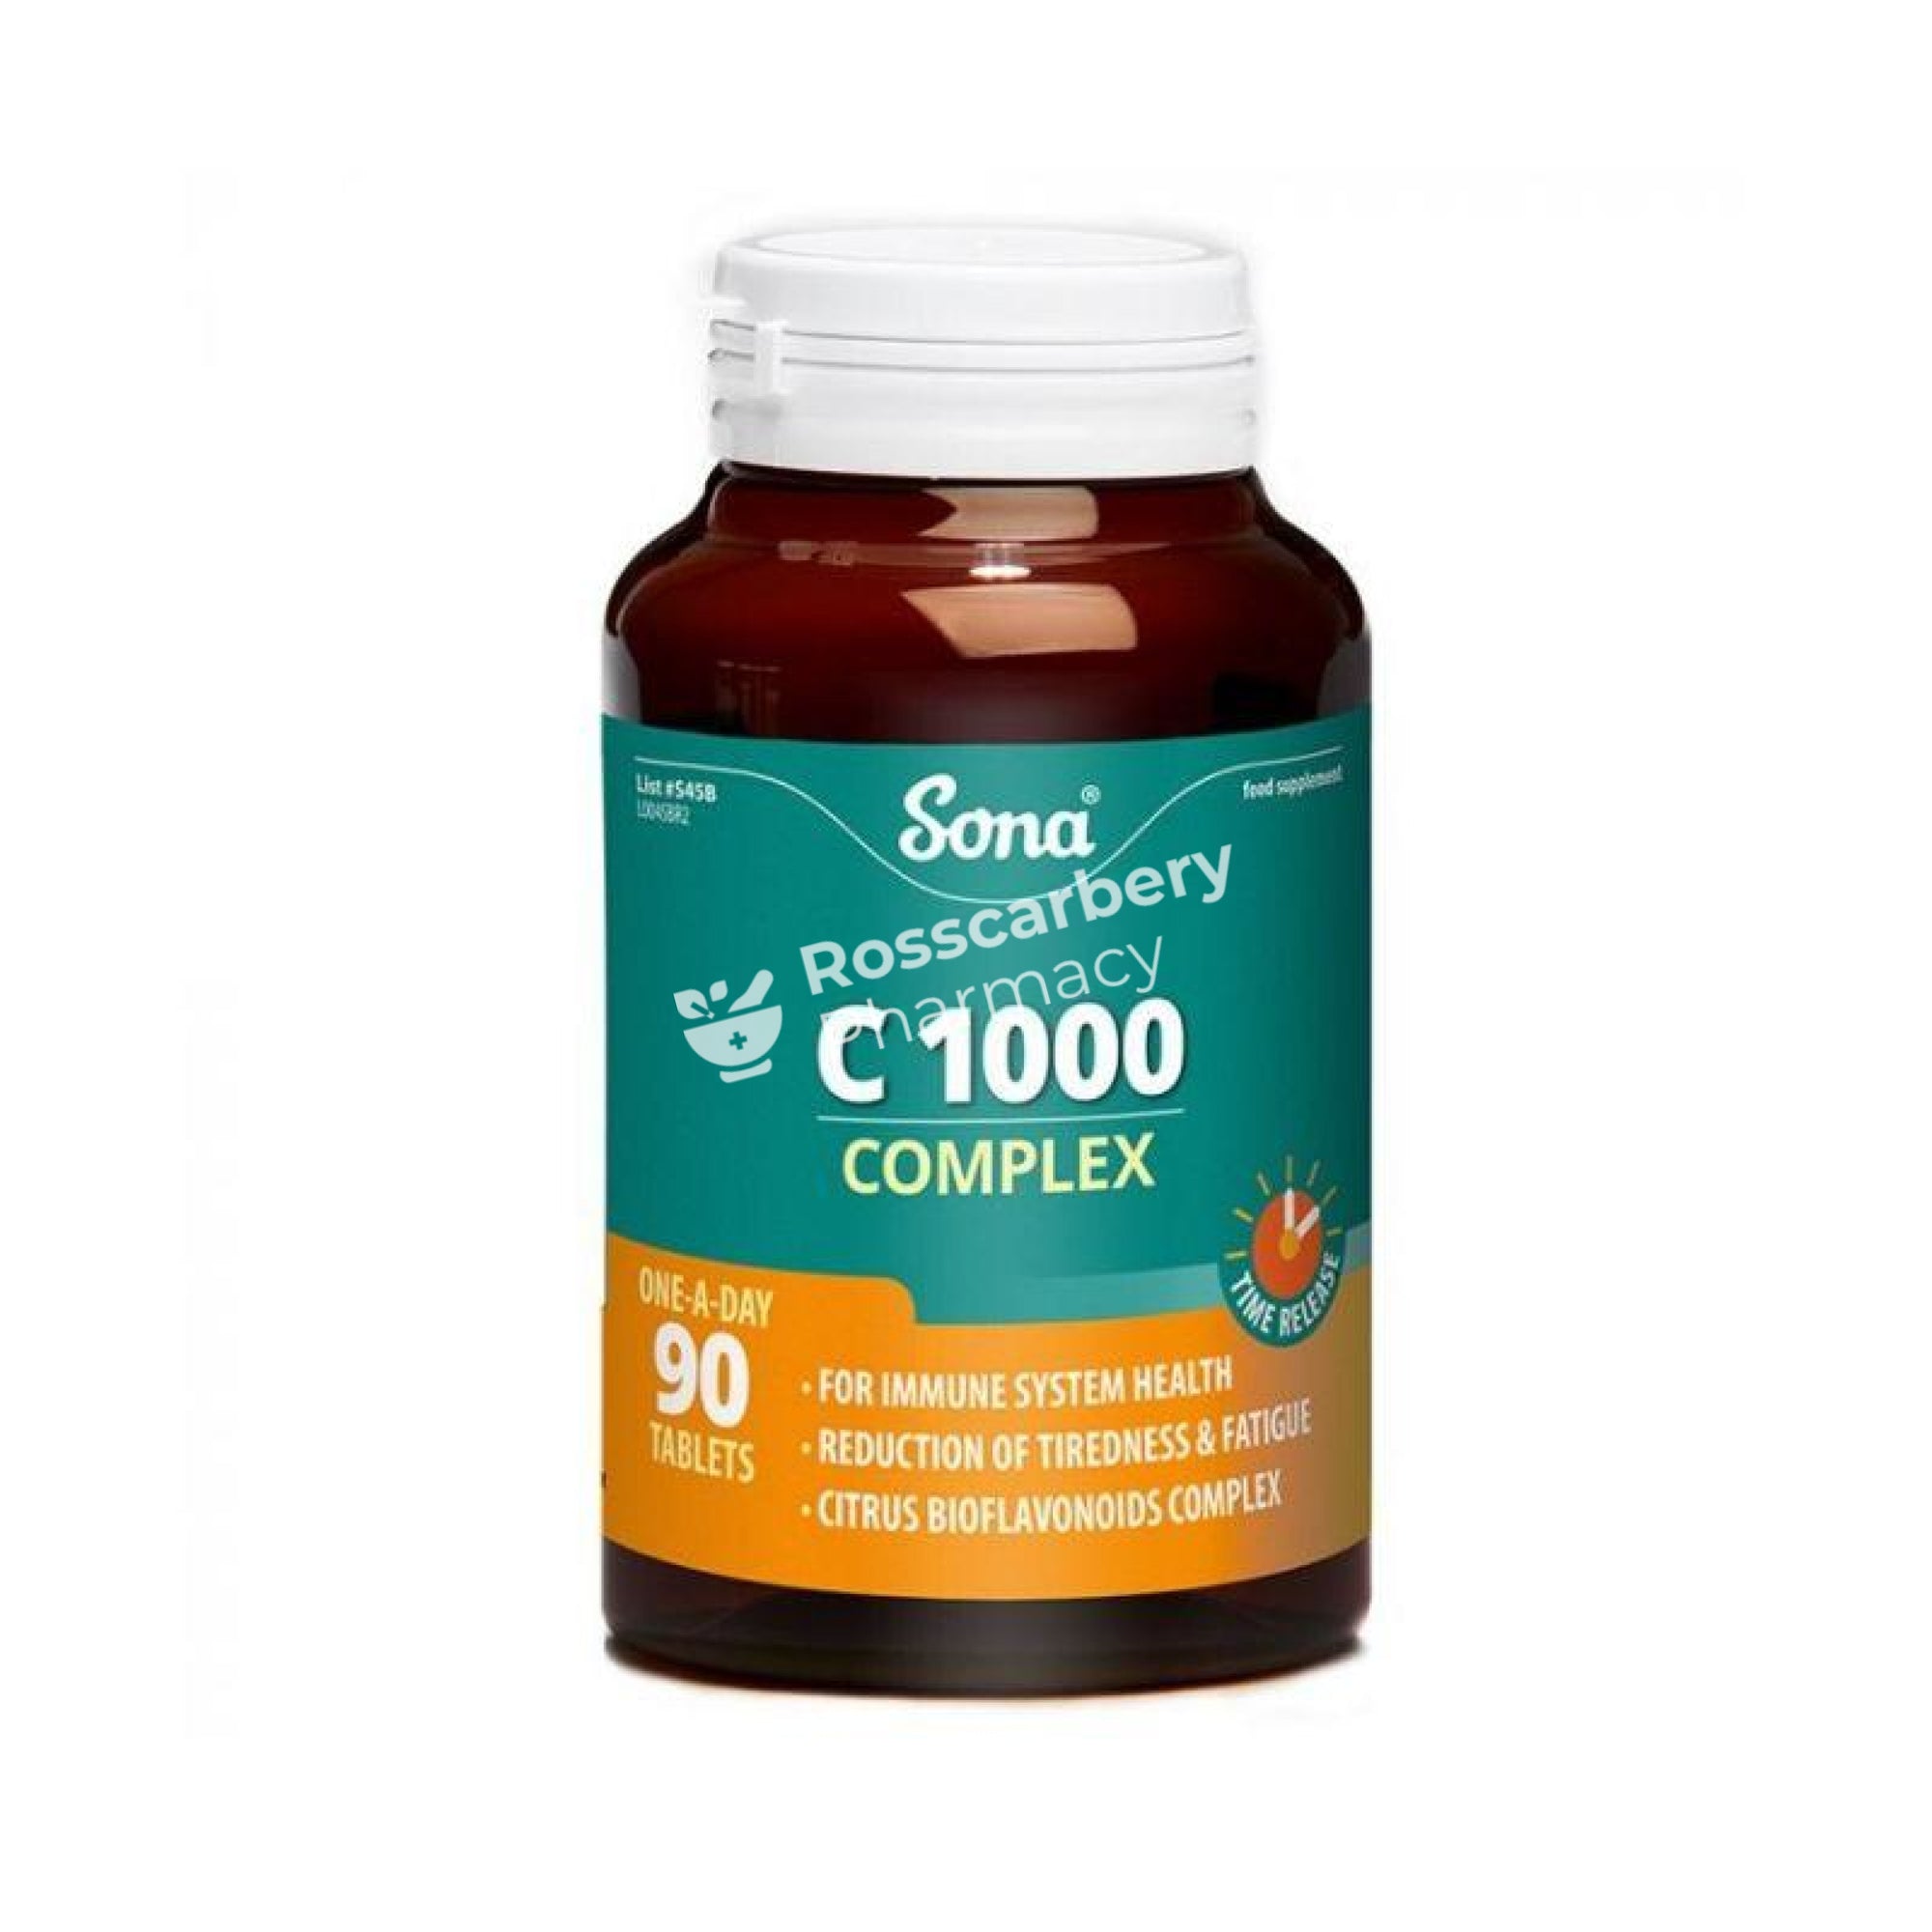 Sona - C 1000 Complex Time Release Immune Support